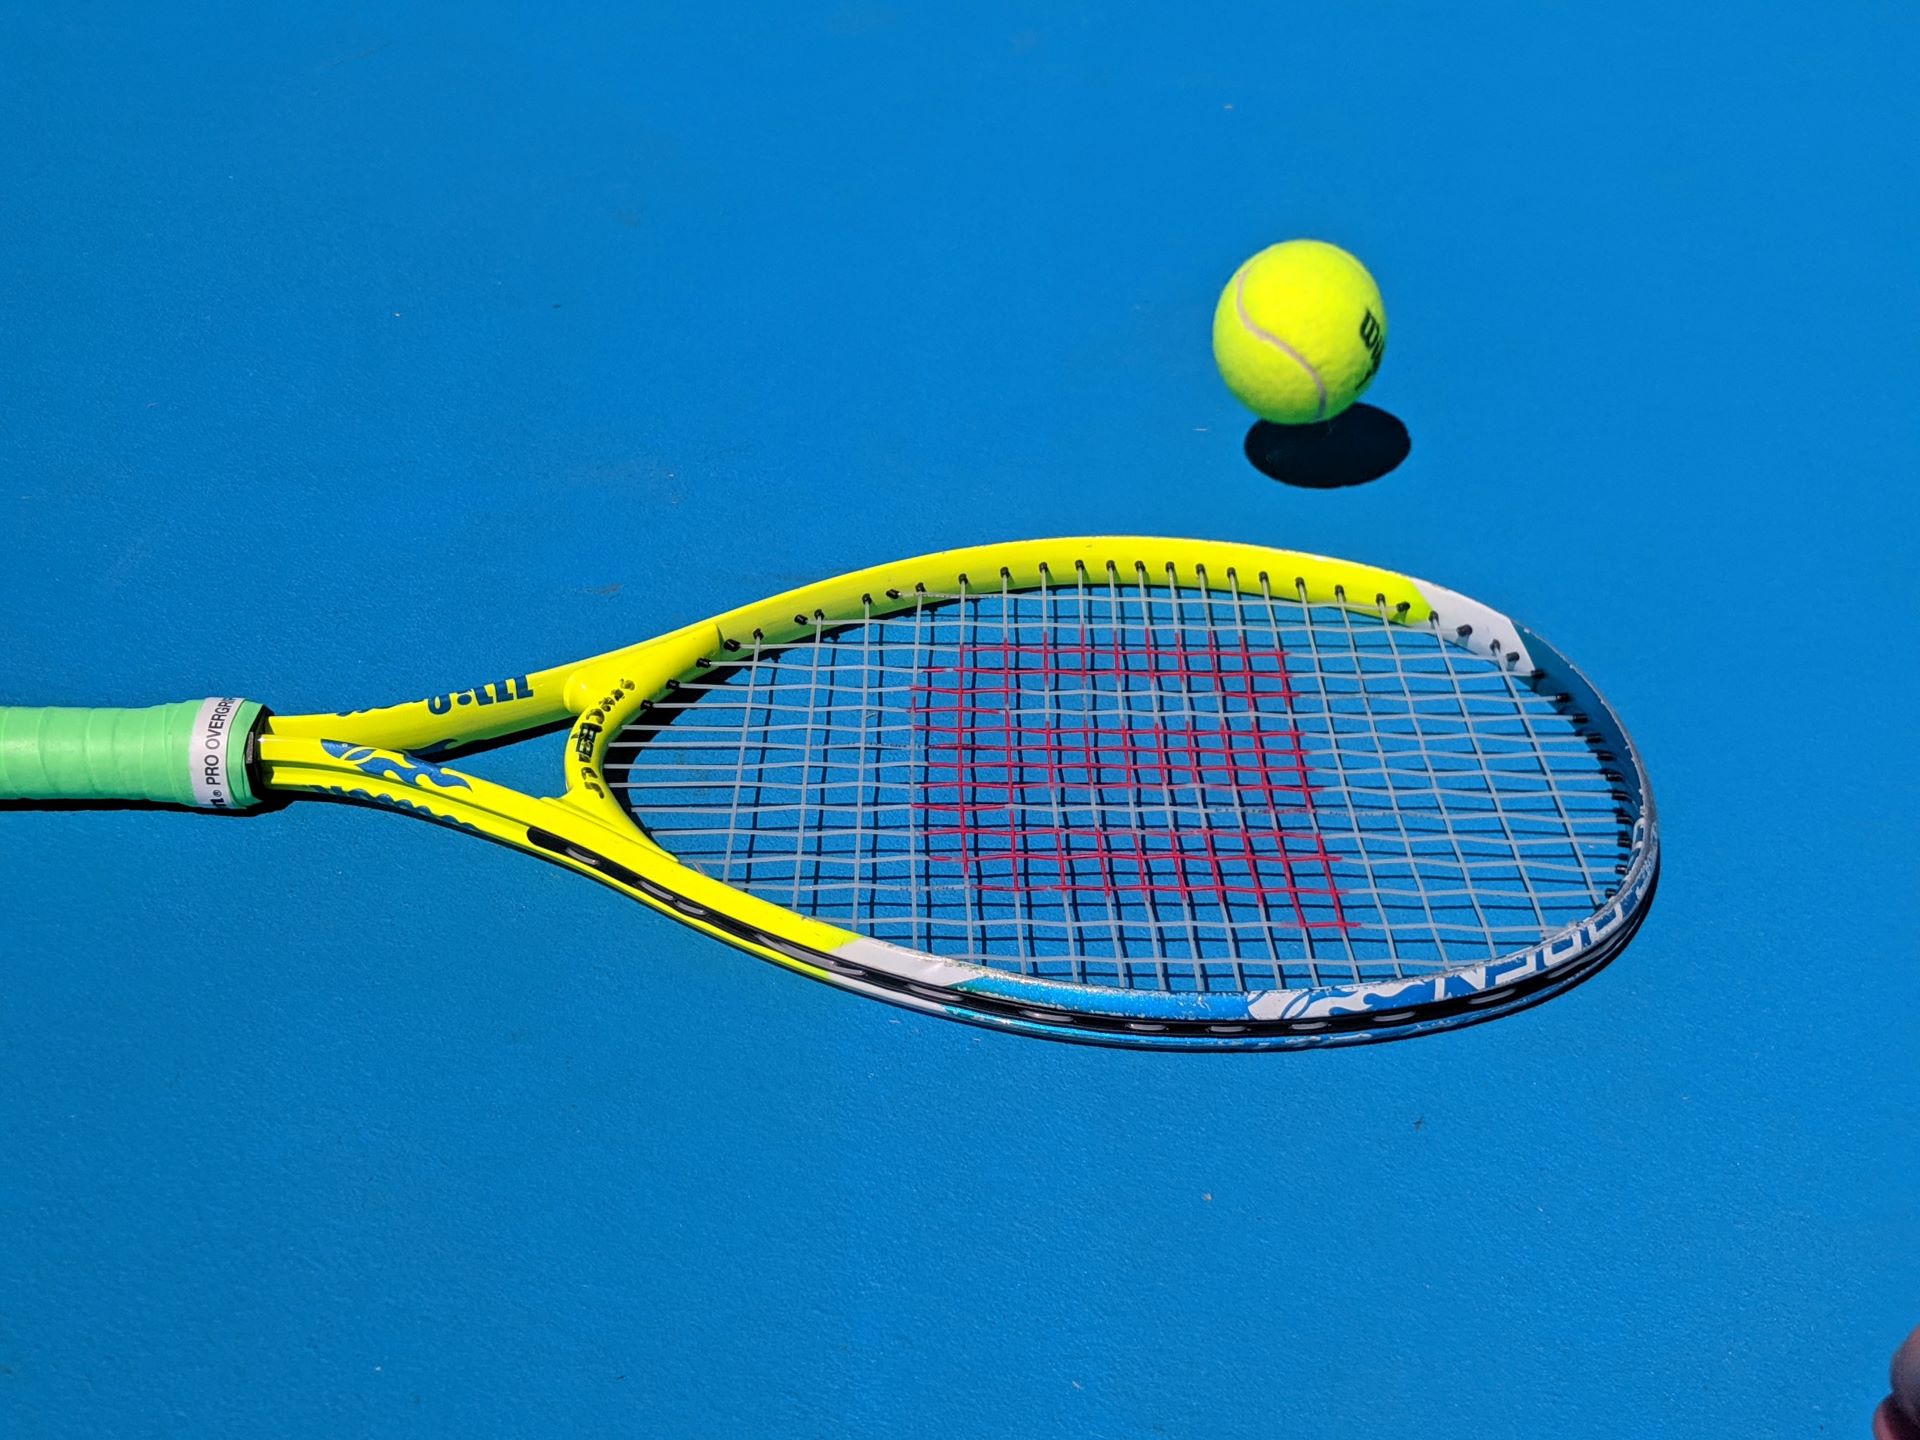 Tennis racket and ball on court.